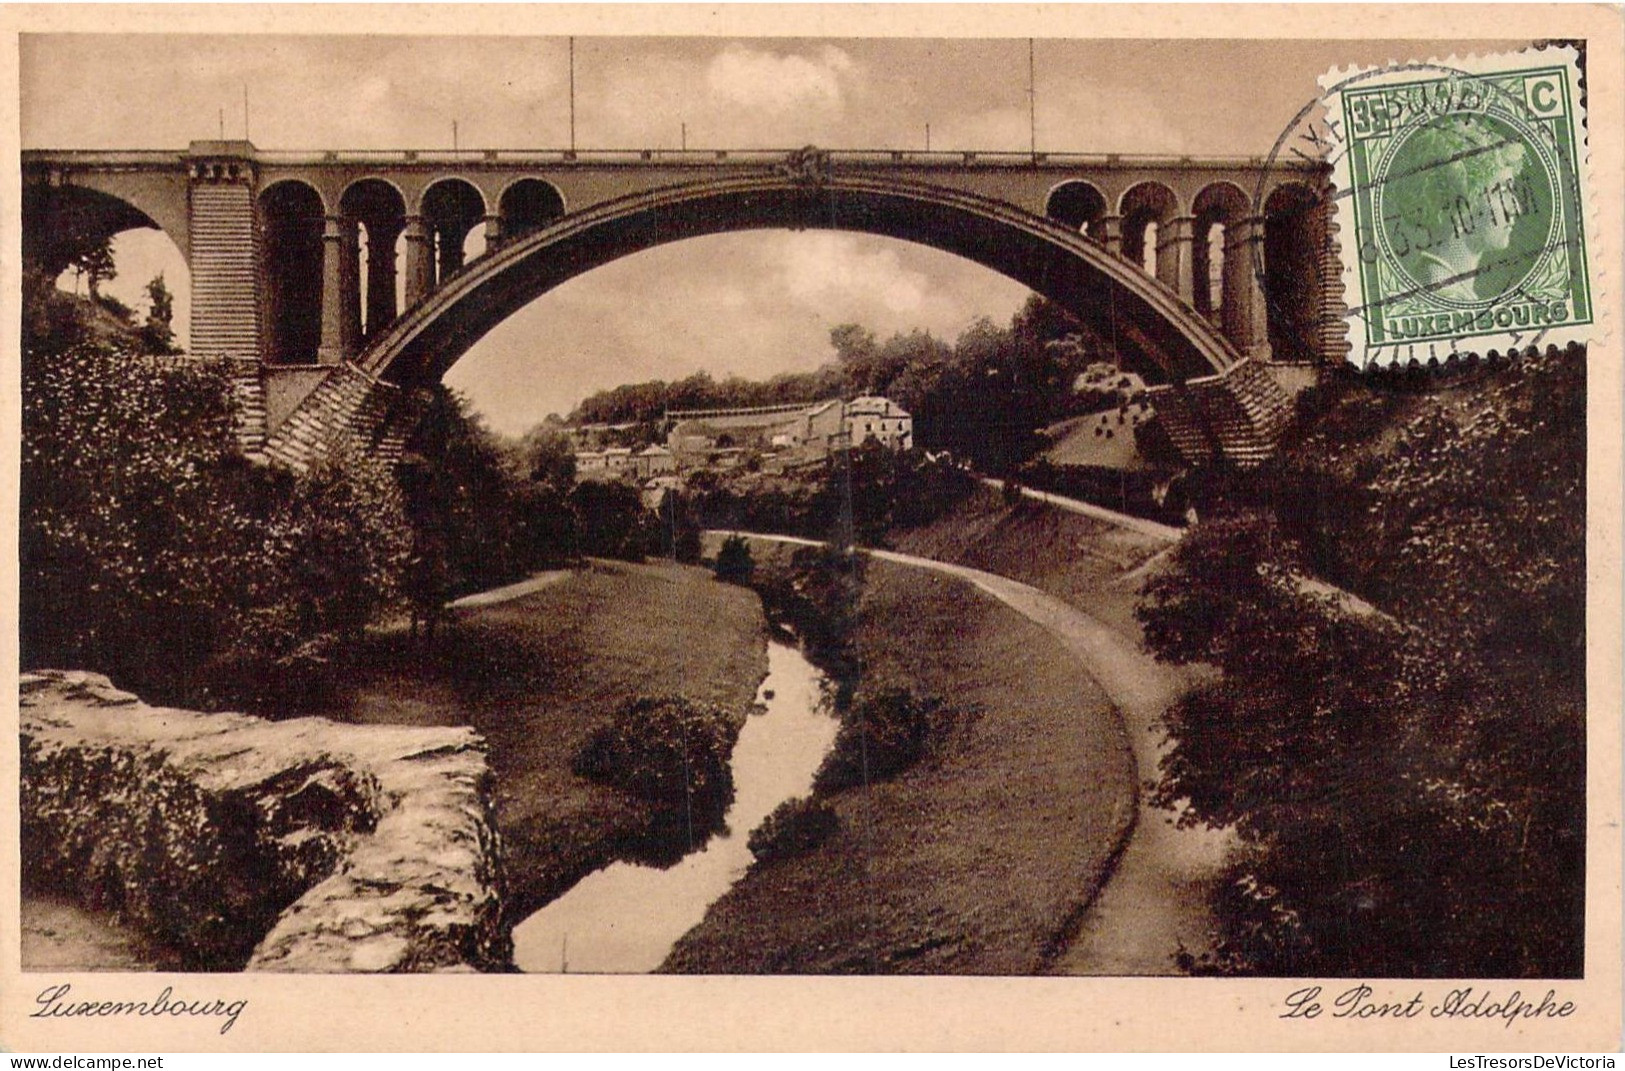 LUXEMBOURG - Le Pont Adolphe - Carte Postale Ancienne - Luxemburgo - Ciudad